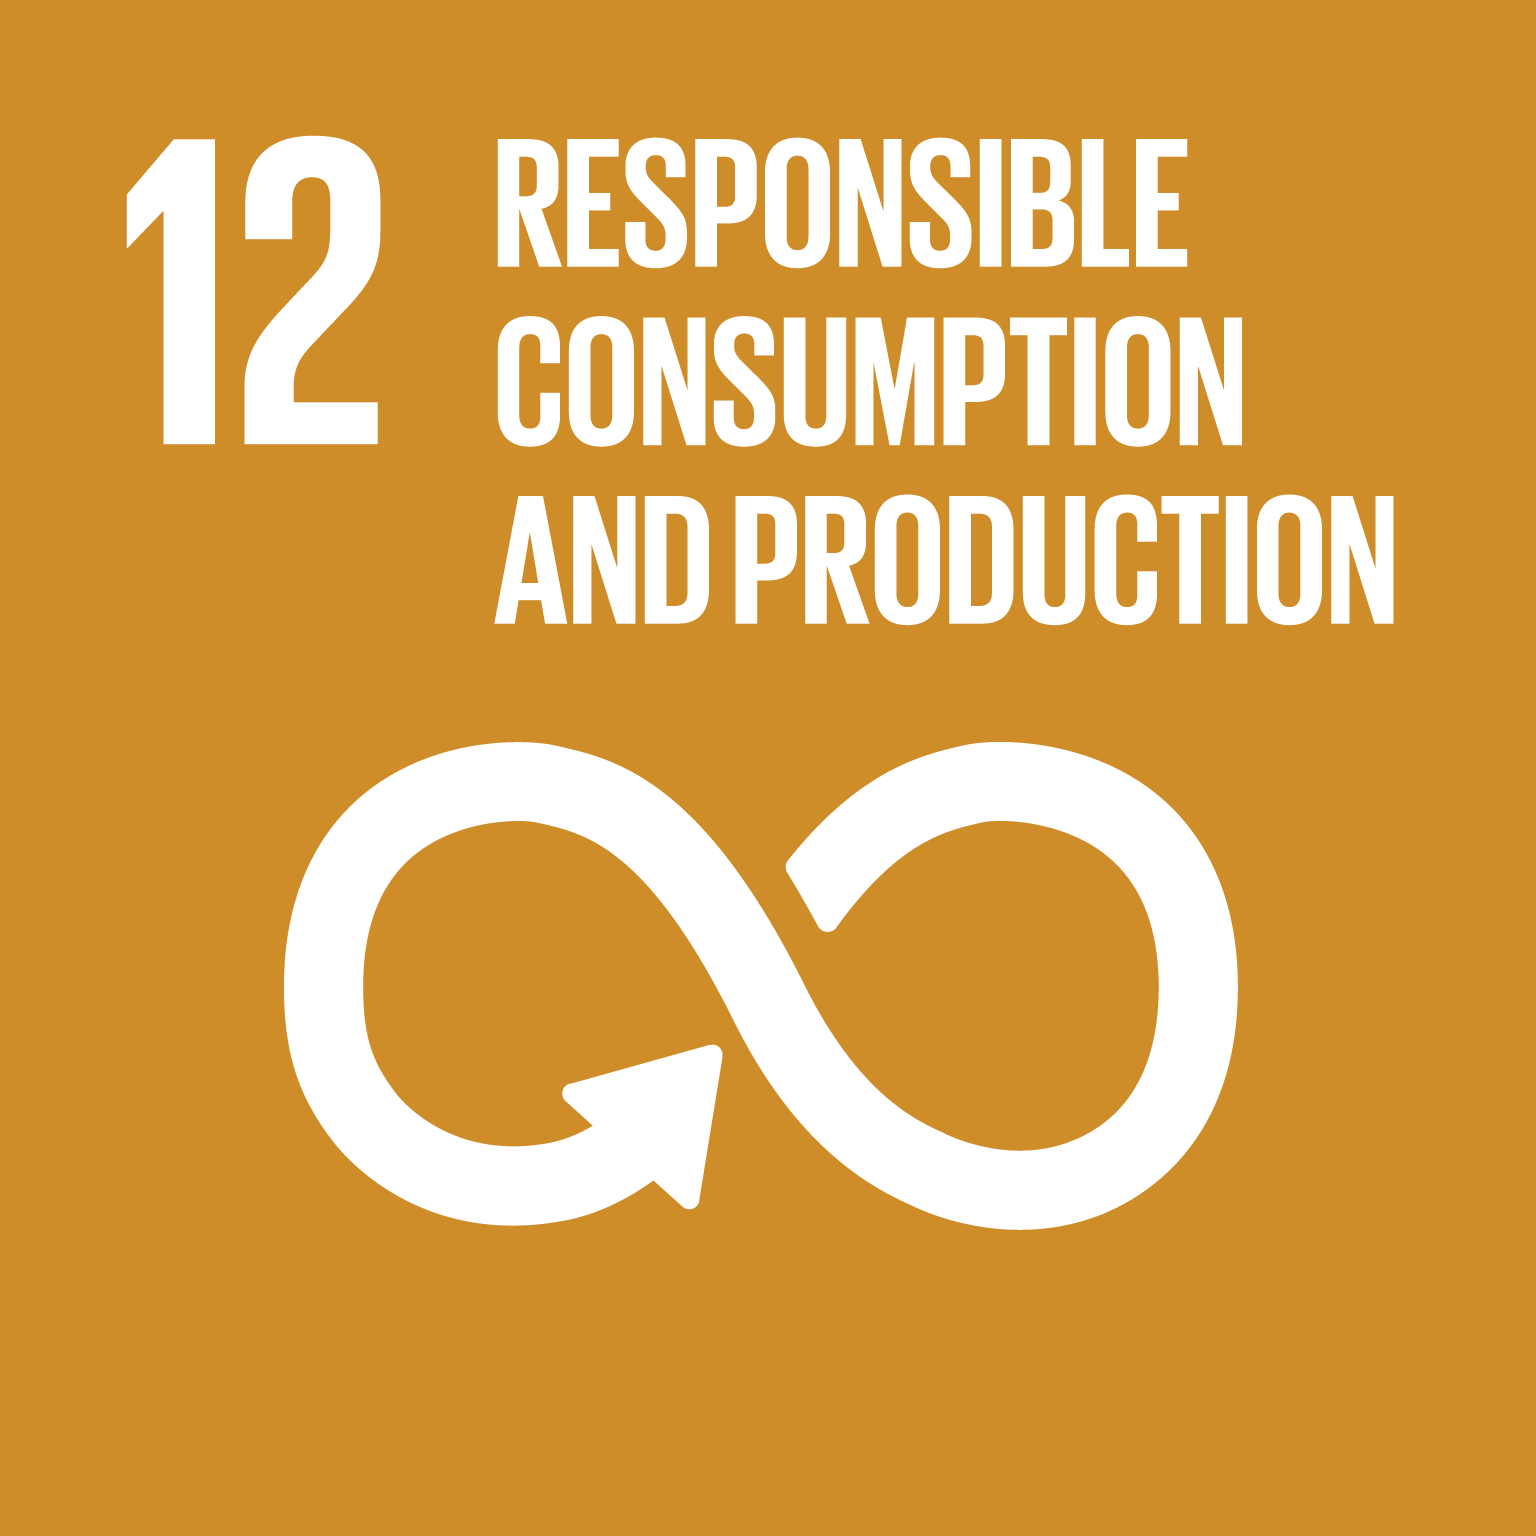 responsible consumption and production icon